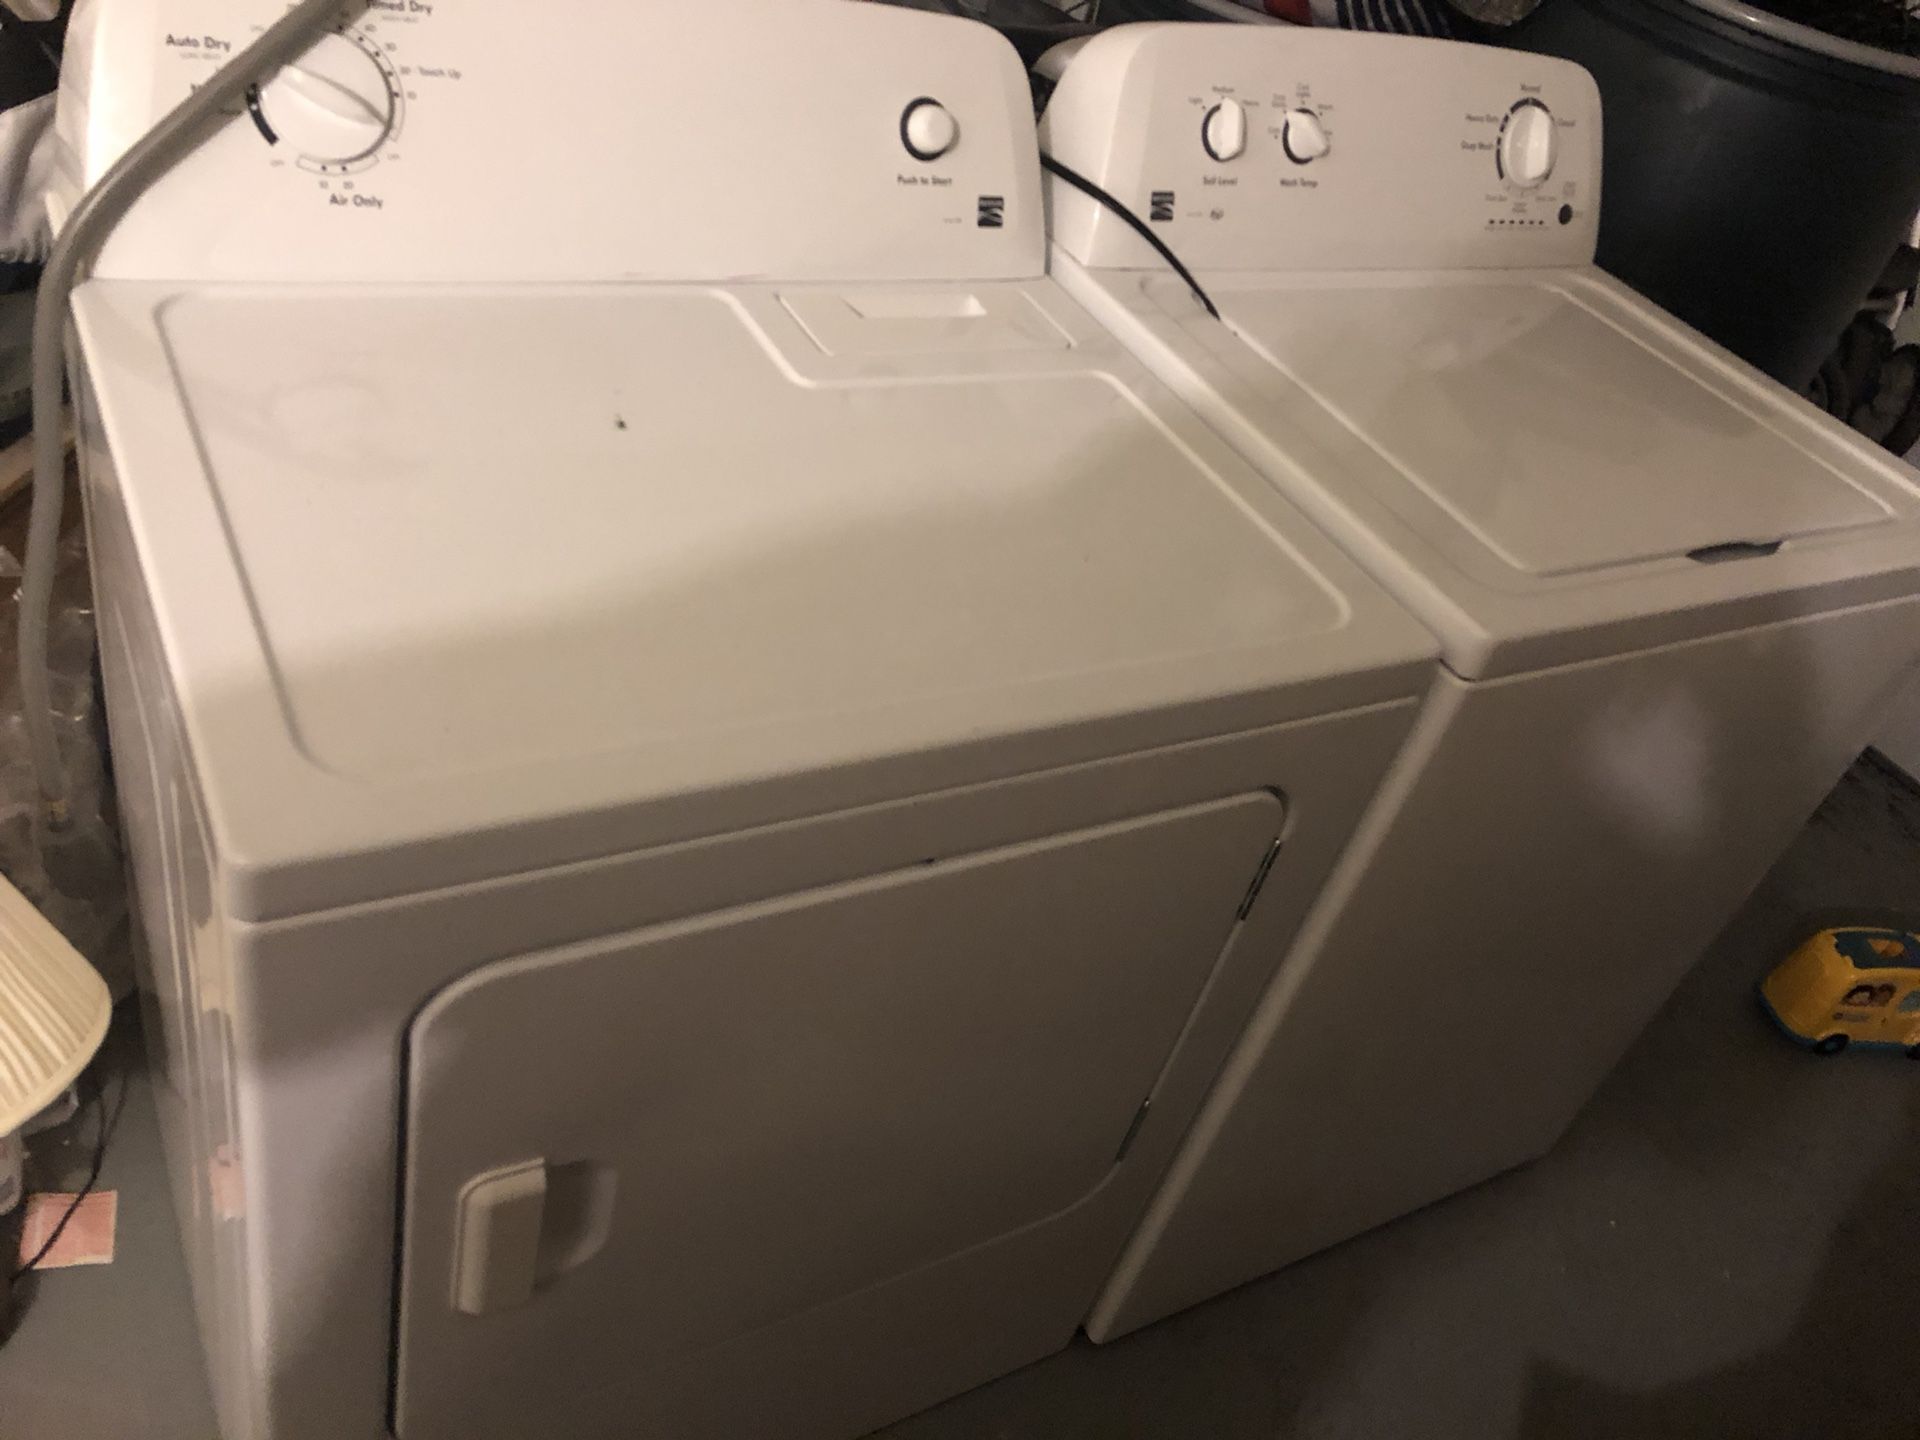 Kenmore washer dryer unit....perfect condition